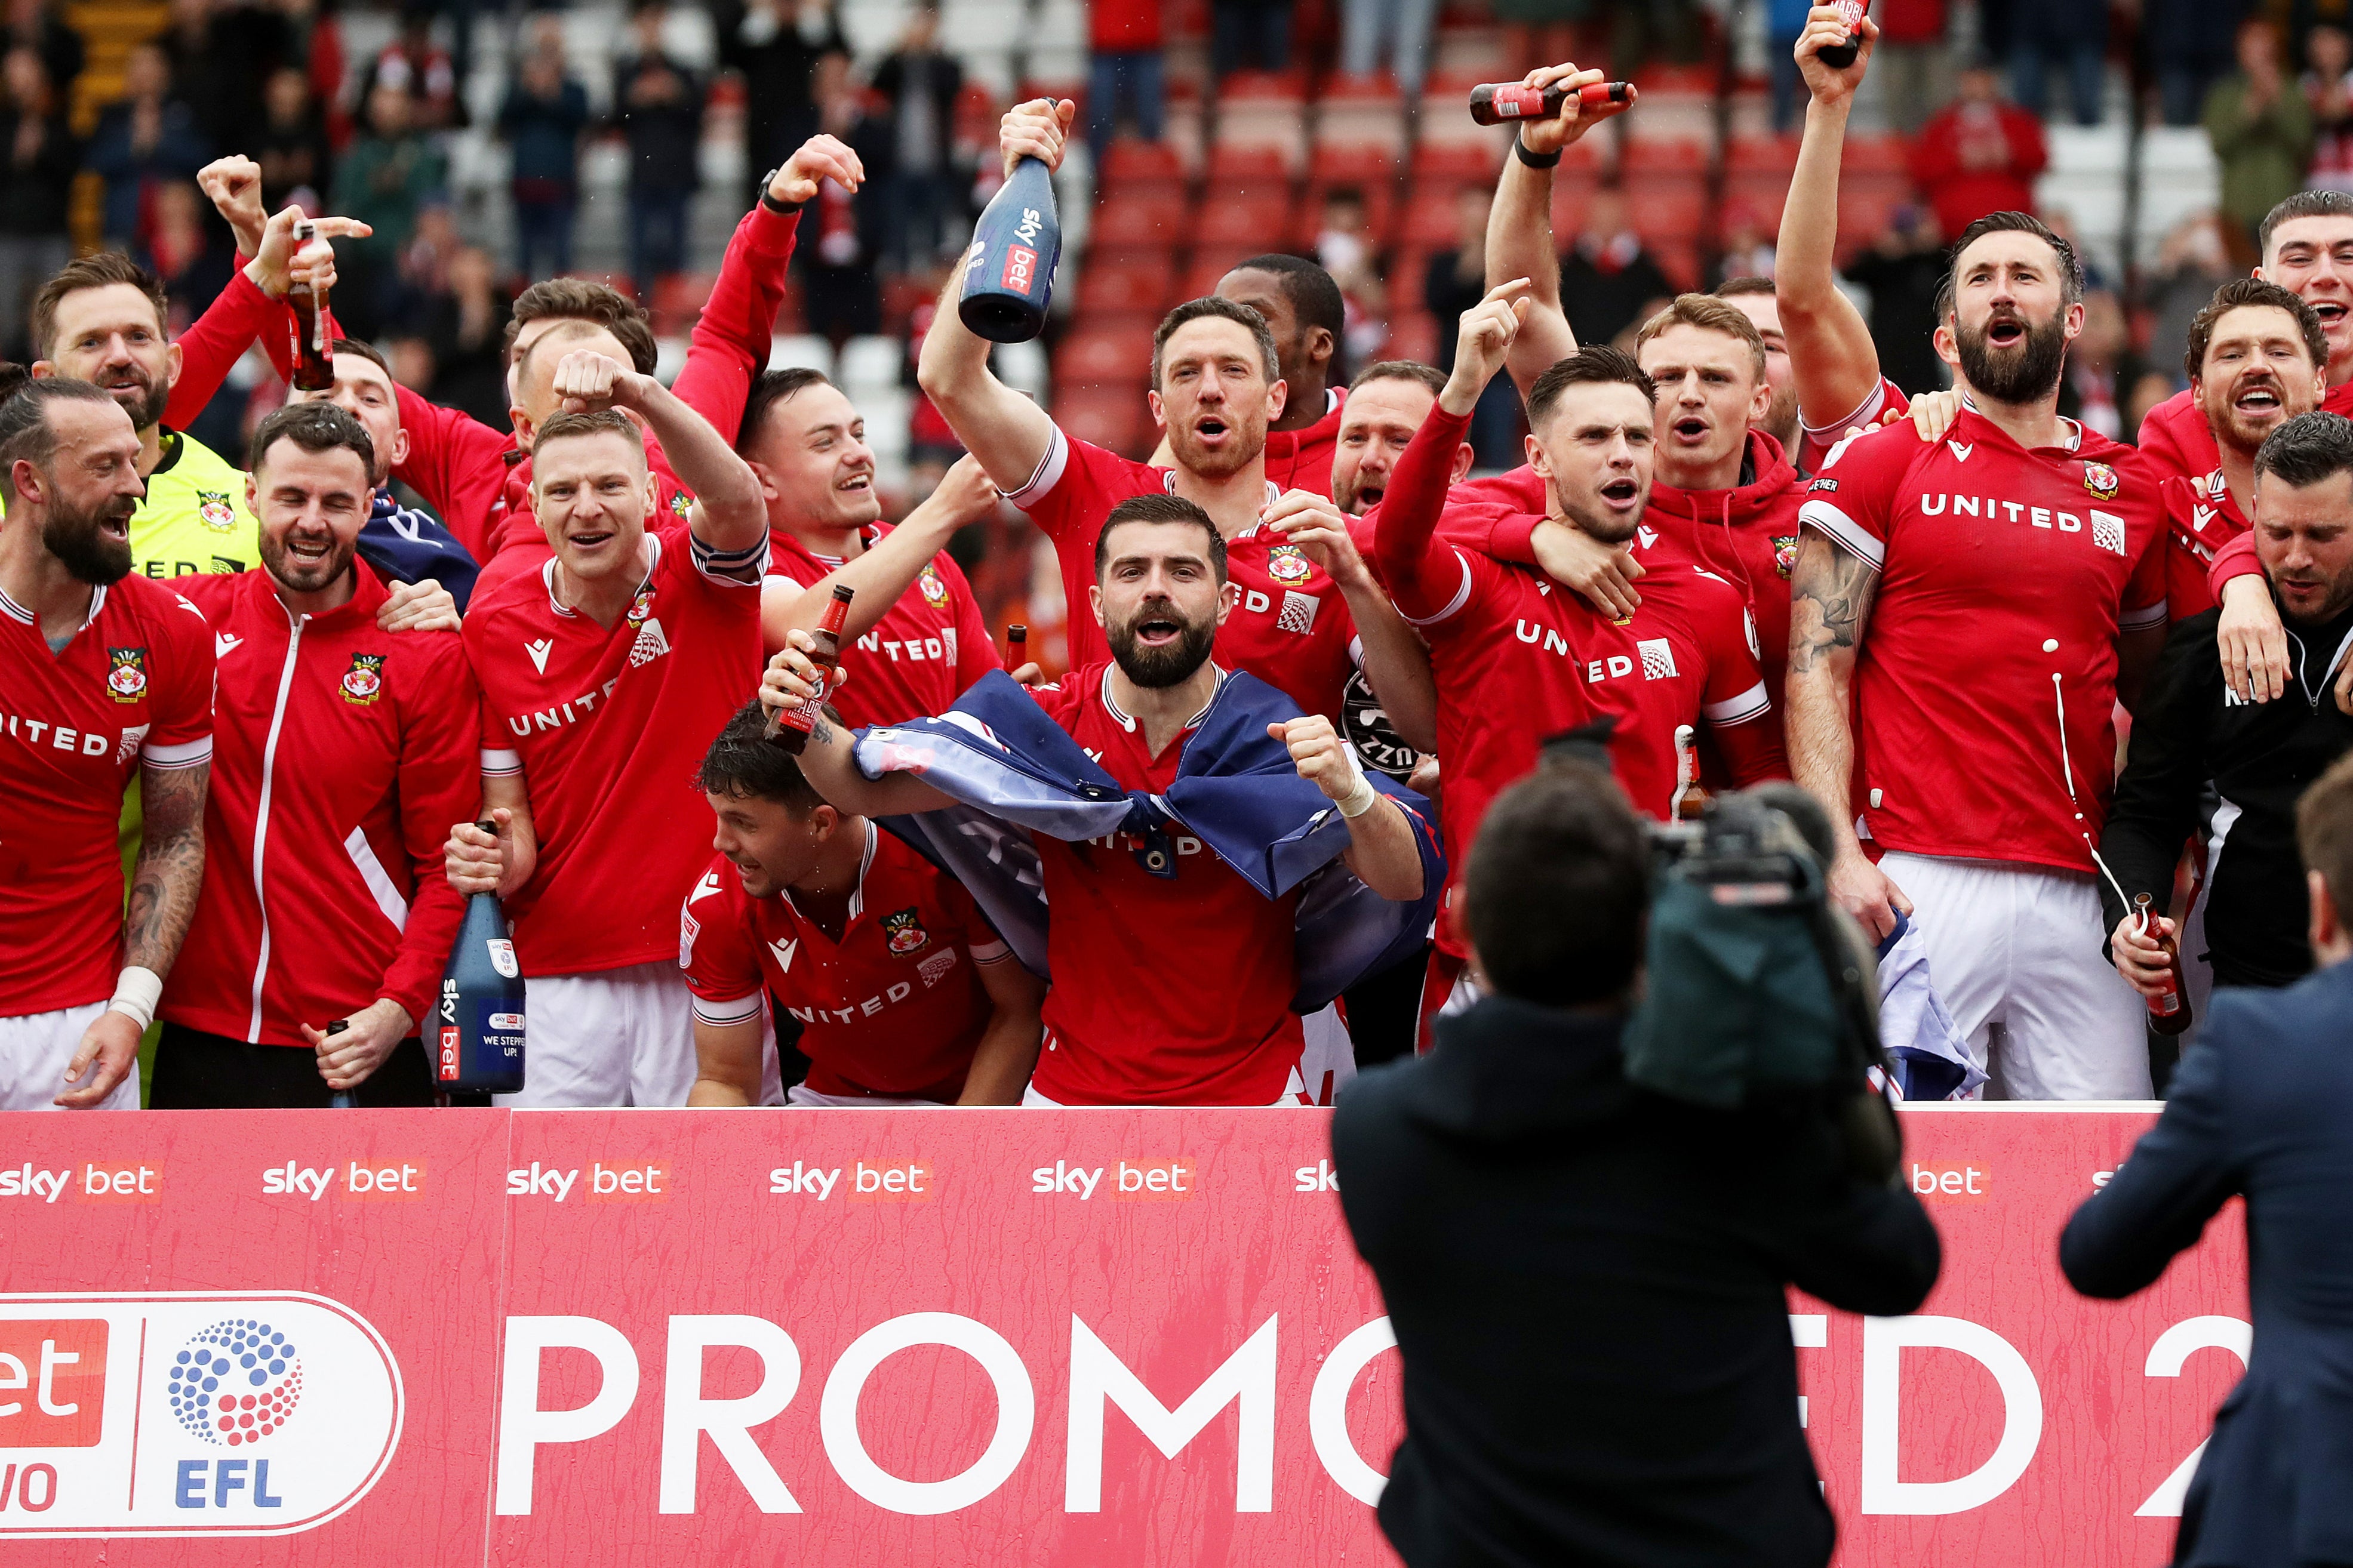 Wrexham earned promotion from League Two this season